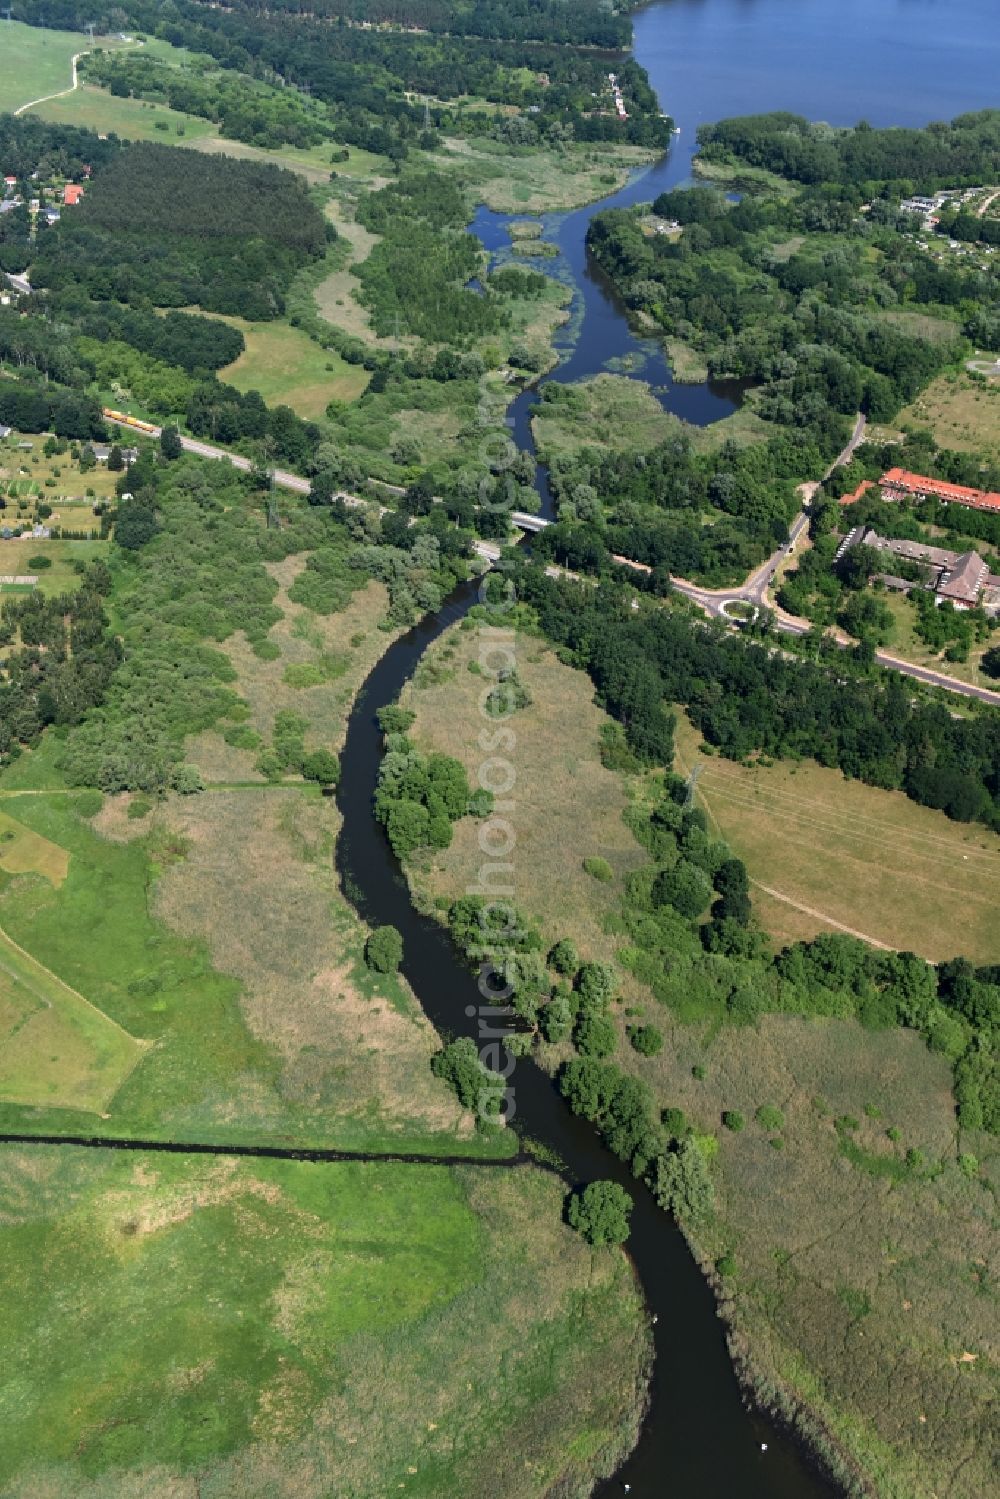 Wusterwitz from above - Course of the river Die Fahrt between Kirchmoeser and Wusterwitz in the state of Brandenburg. The river connects the lakes Wendsee in the North and Grosser Wusterwitzer See in the South